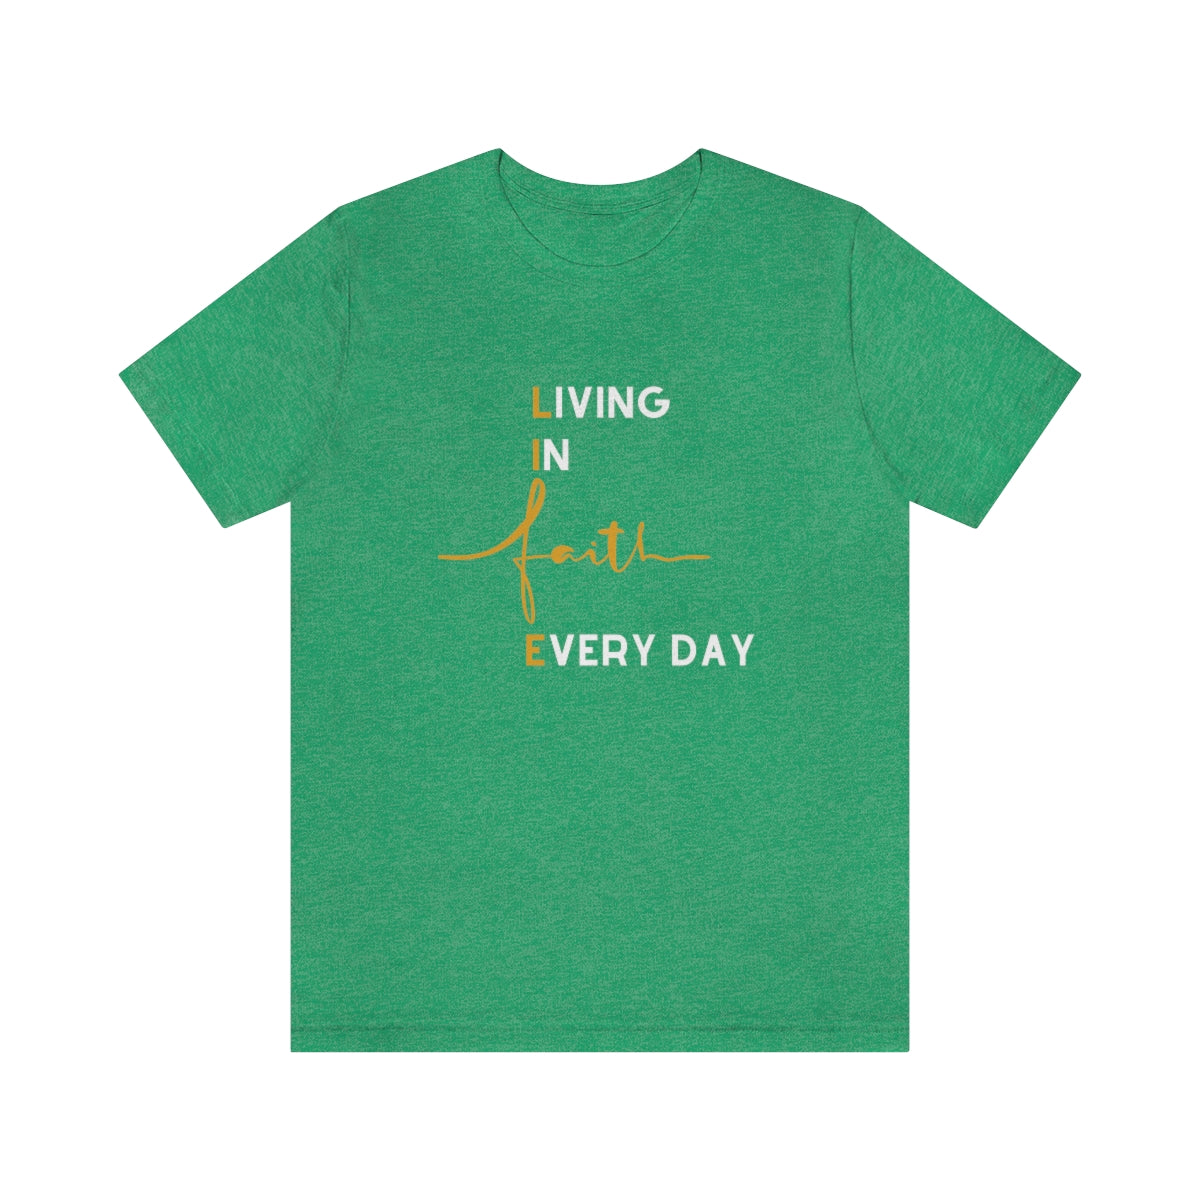 LIFE: LIVING IN FAITH EVERY DAY T-SHIRT-T-Shirt-Heather Kelly-S-mysticalcherry